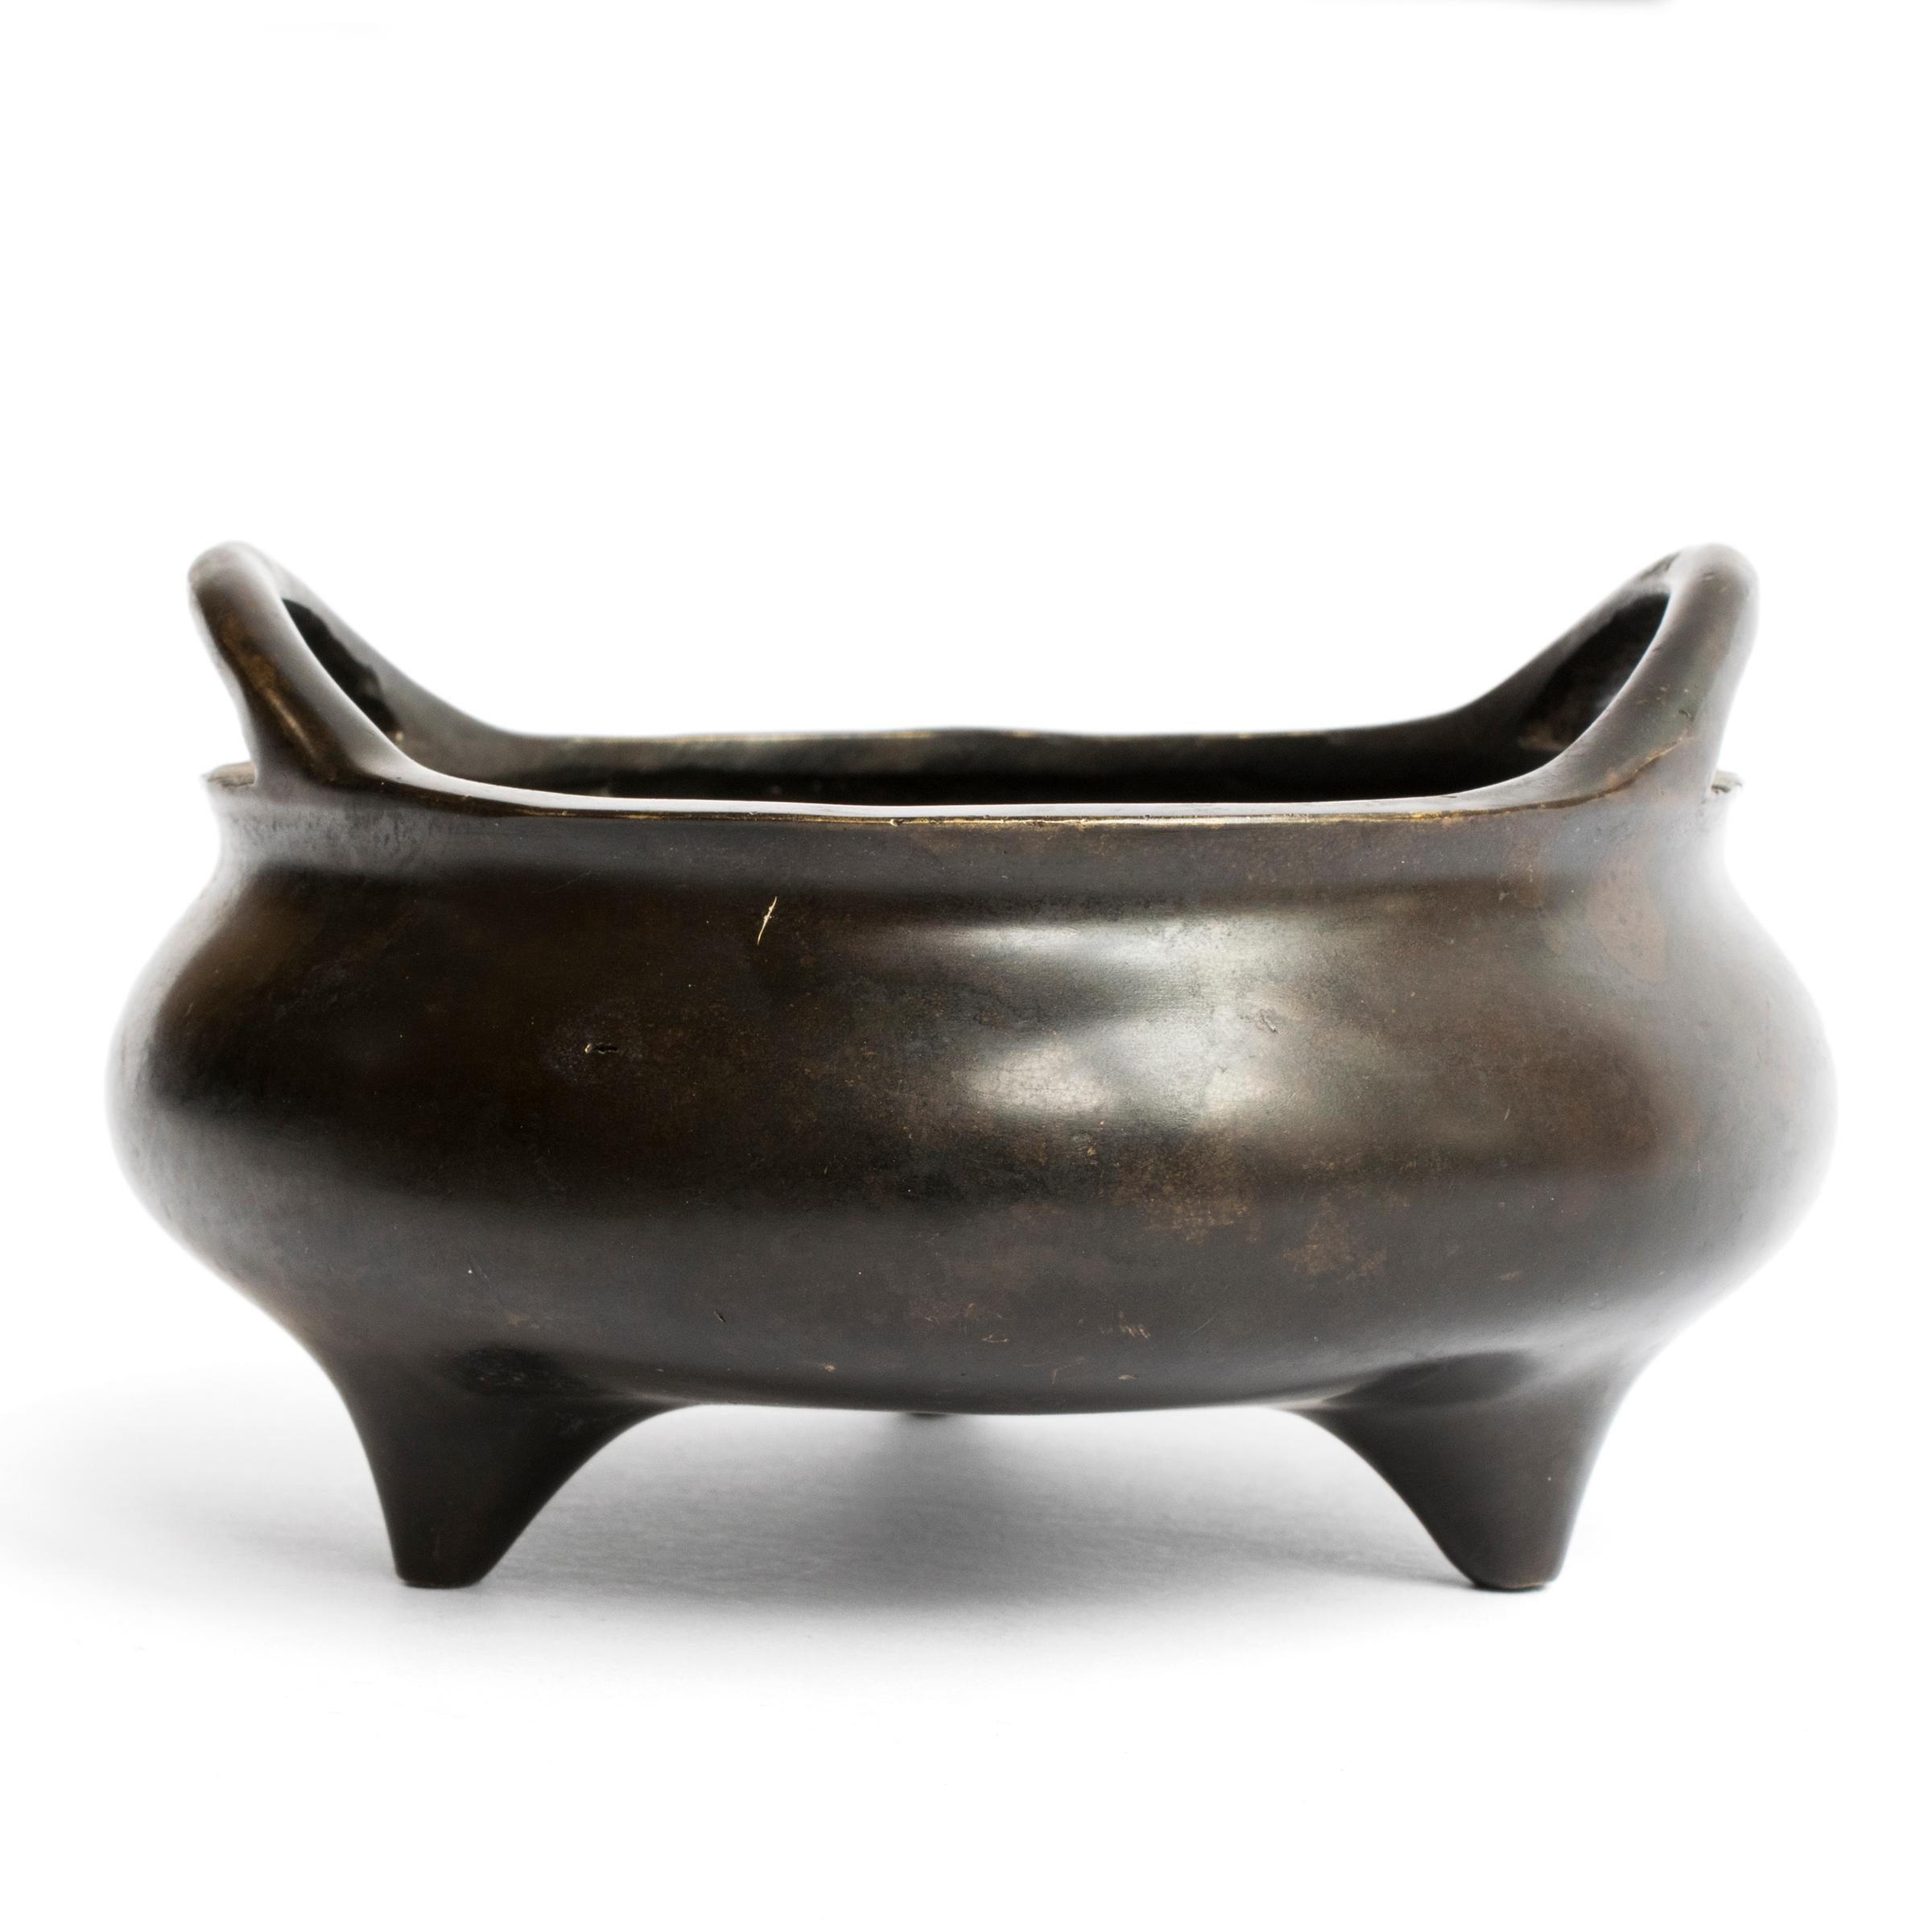 20th Century Chinese Bronze Tripod Censer with Strap Handles, c. 1900 For Sale